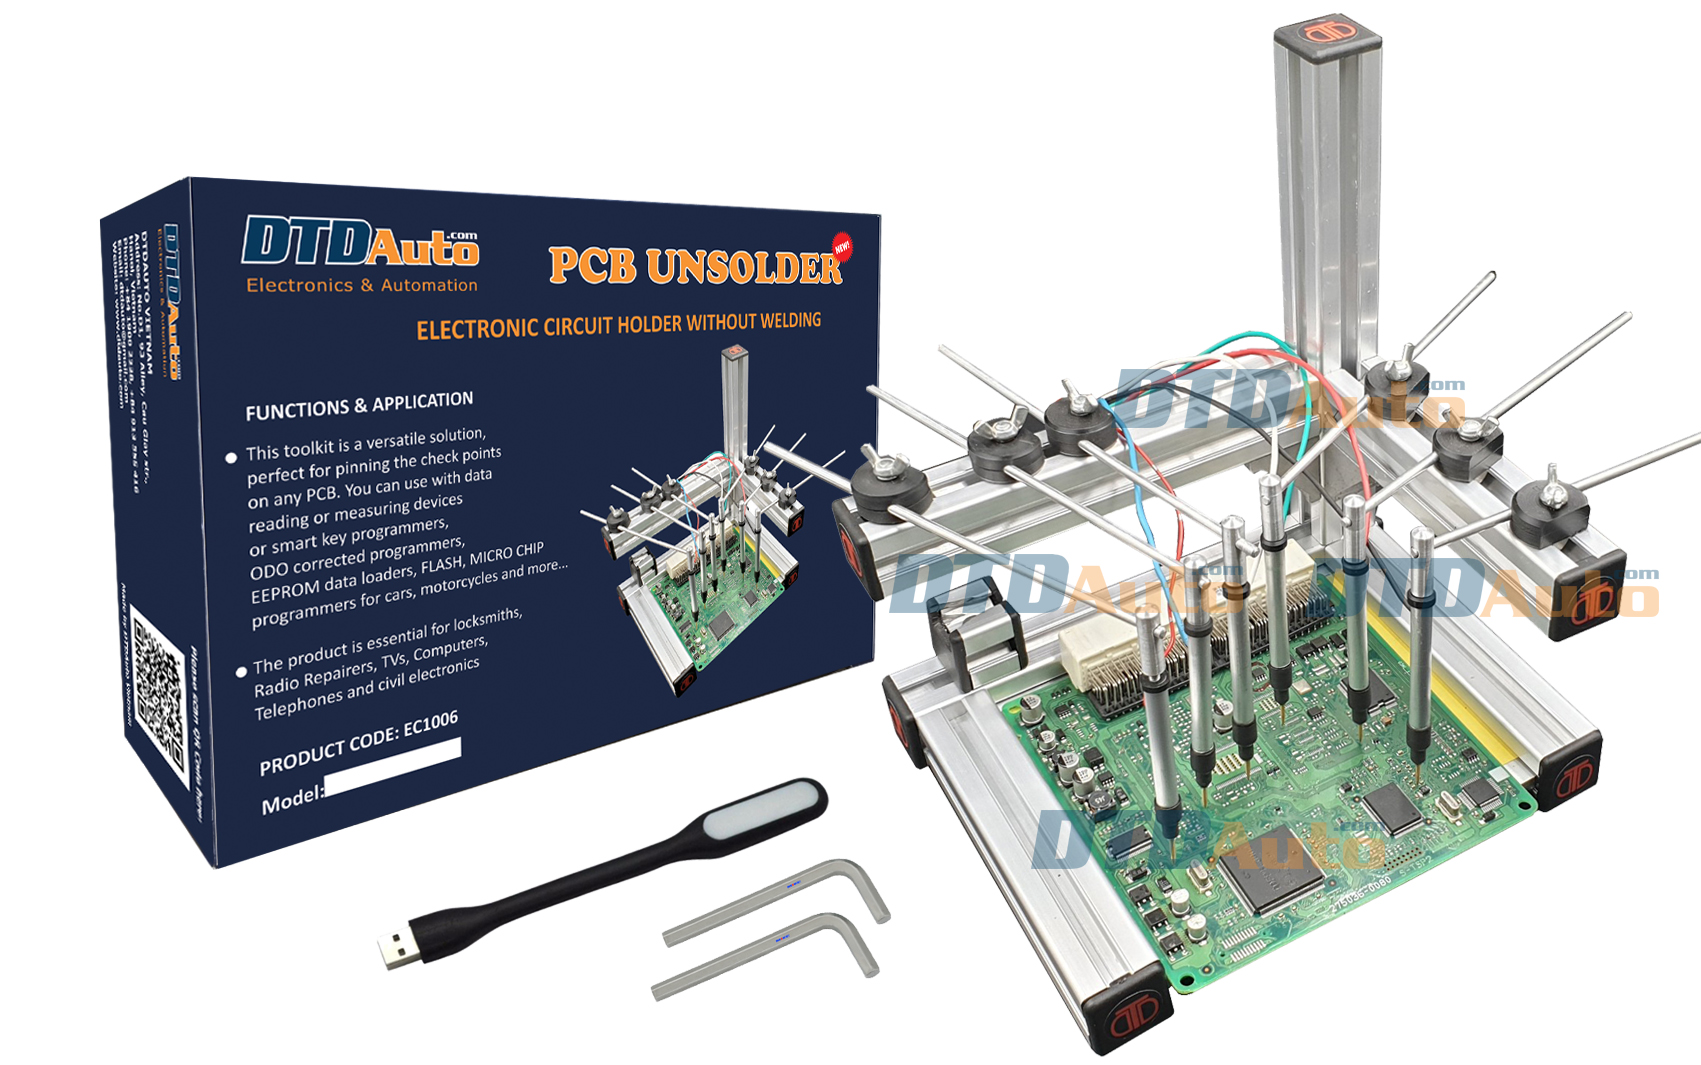 PCB UNSOLDER - ELECTRONIC CIRCUIT HOLDER WITHOUT WELDING RELEASED IN APRIL, 2020